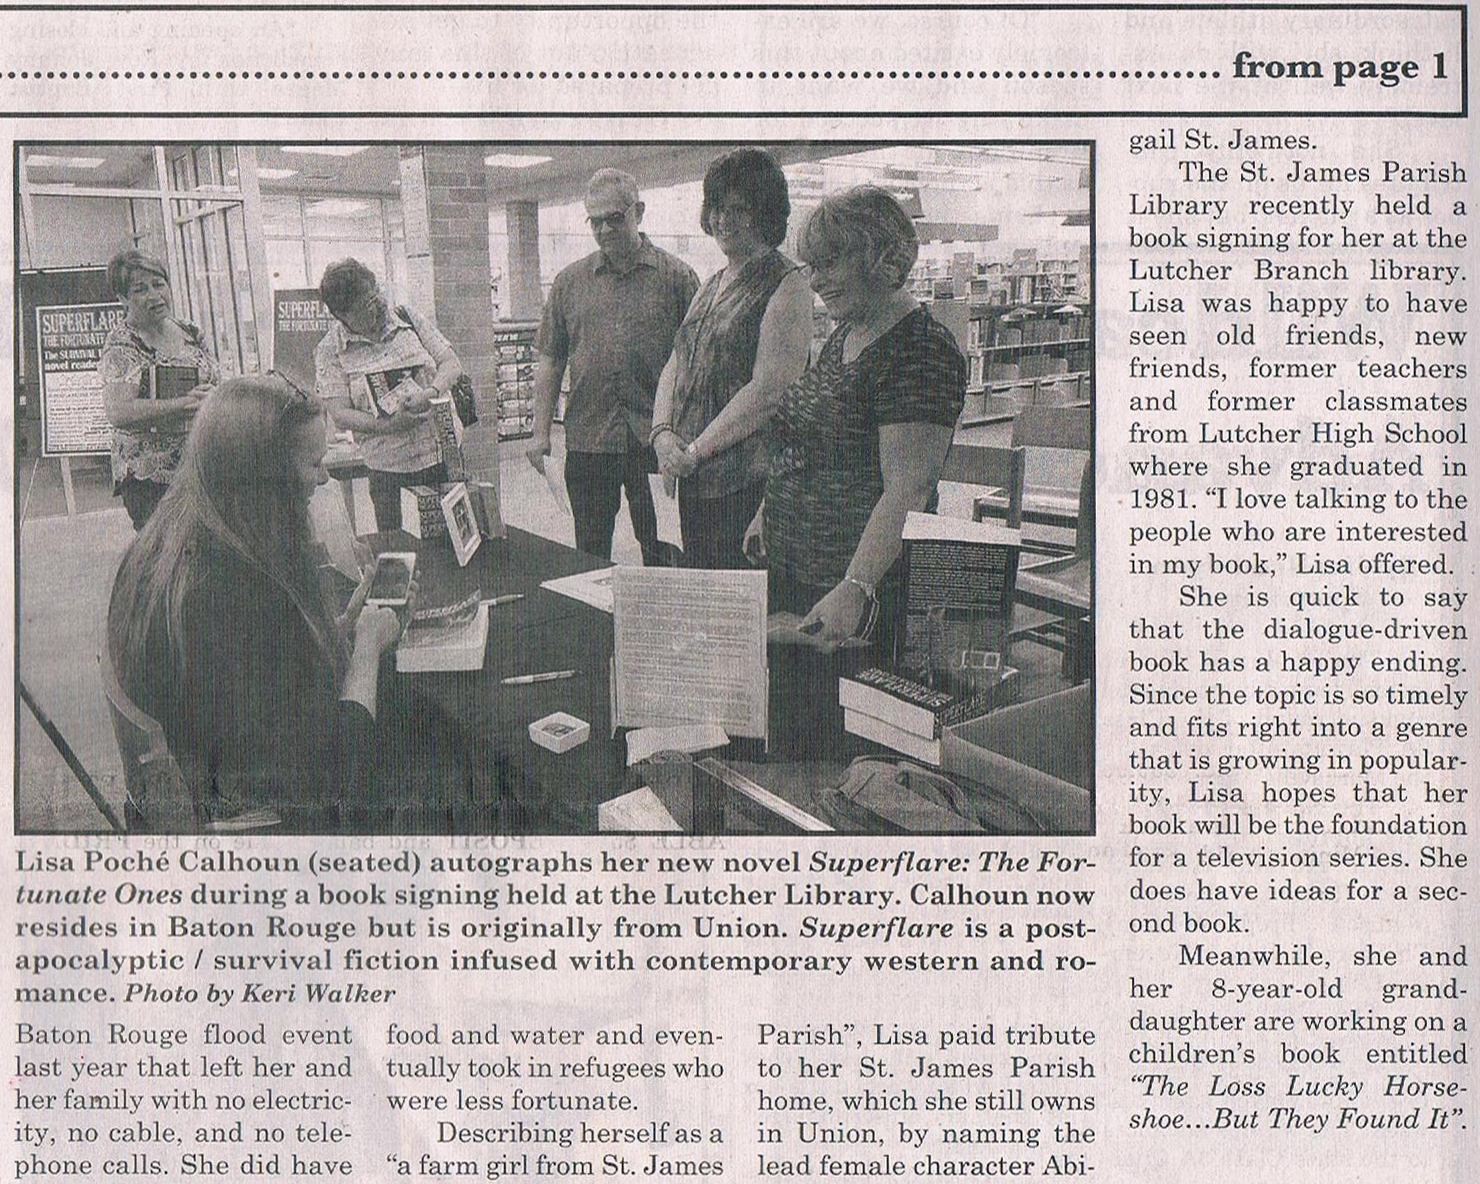 The News Examiner Article